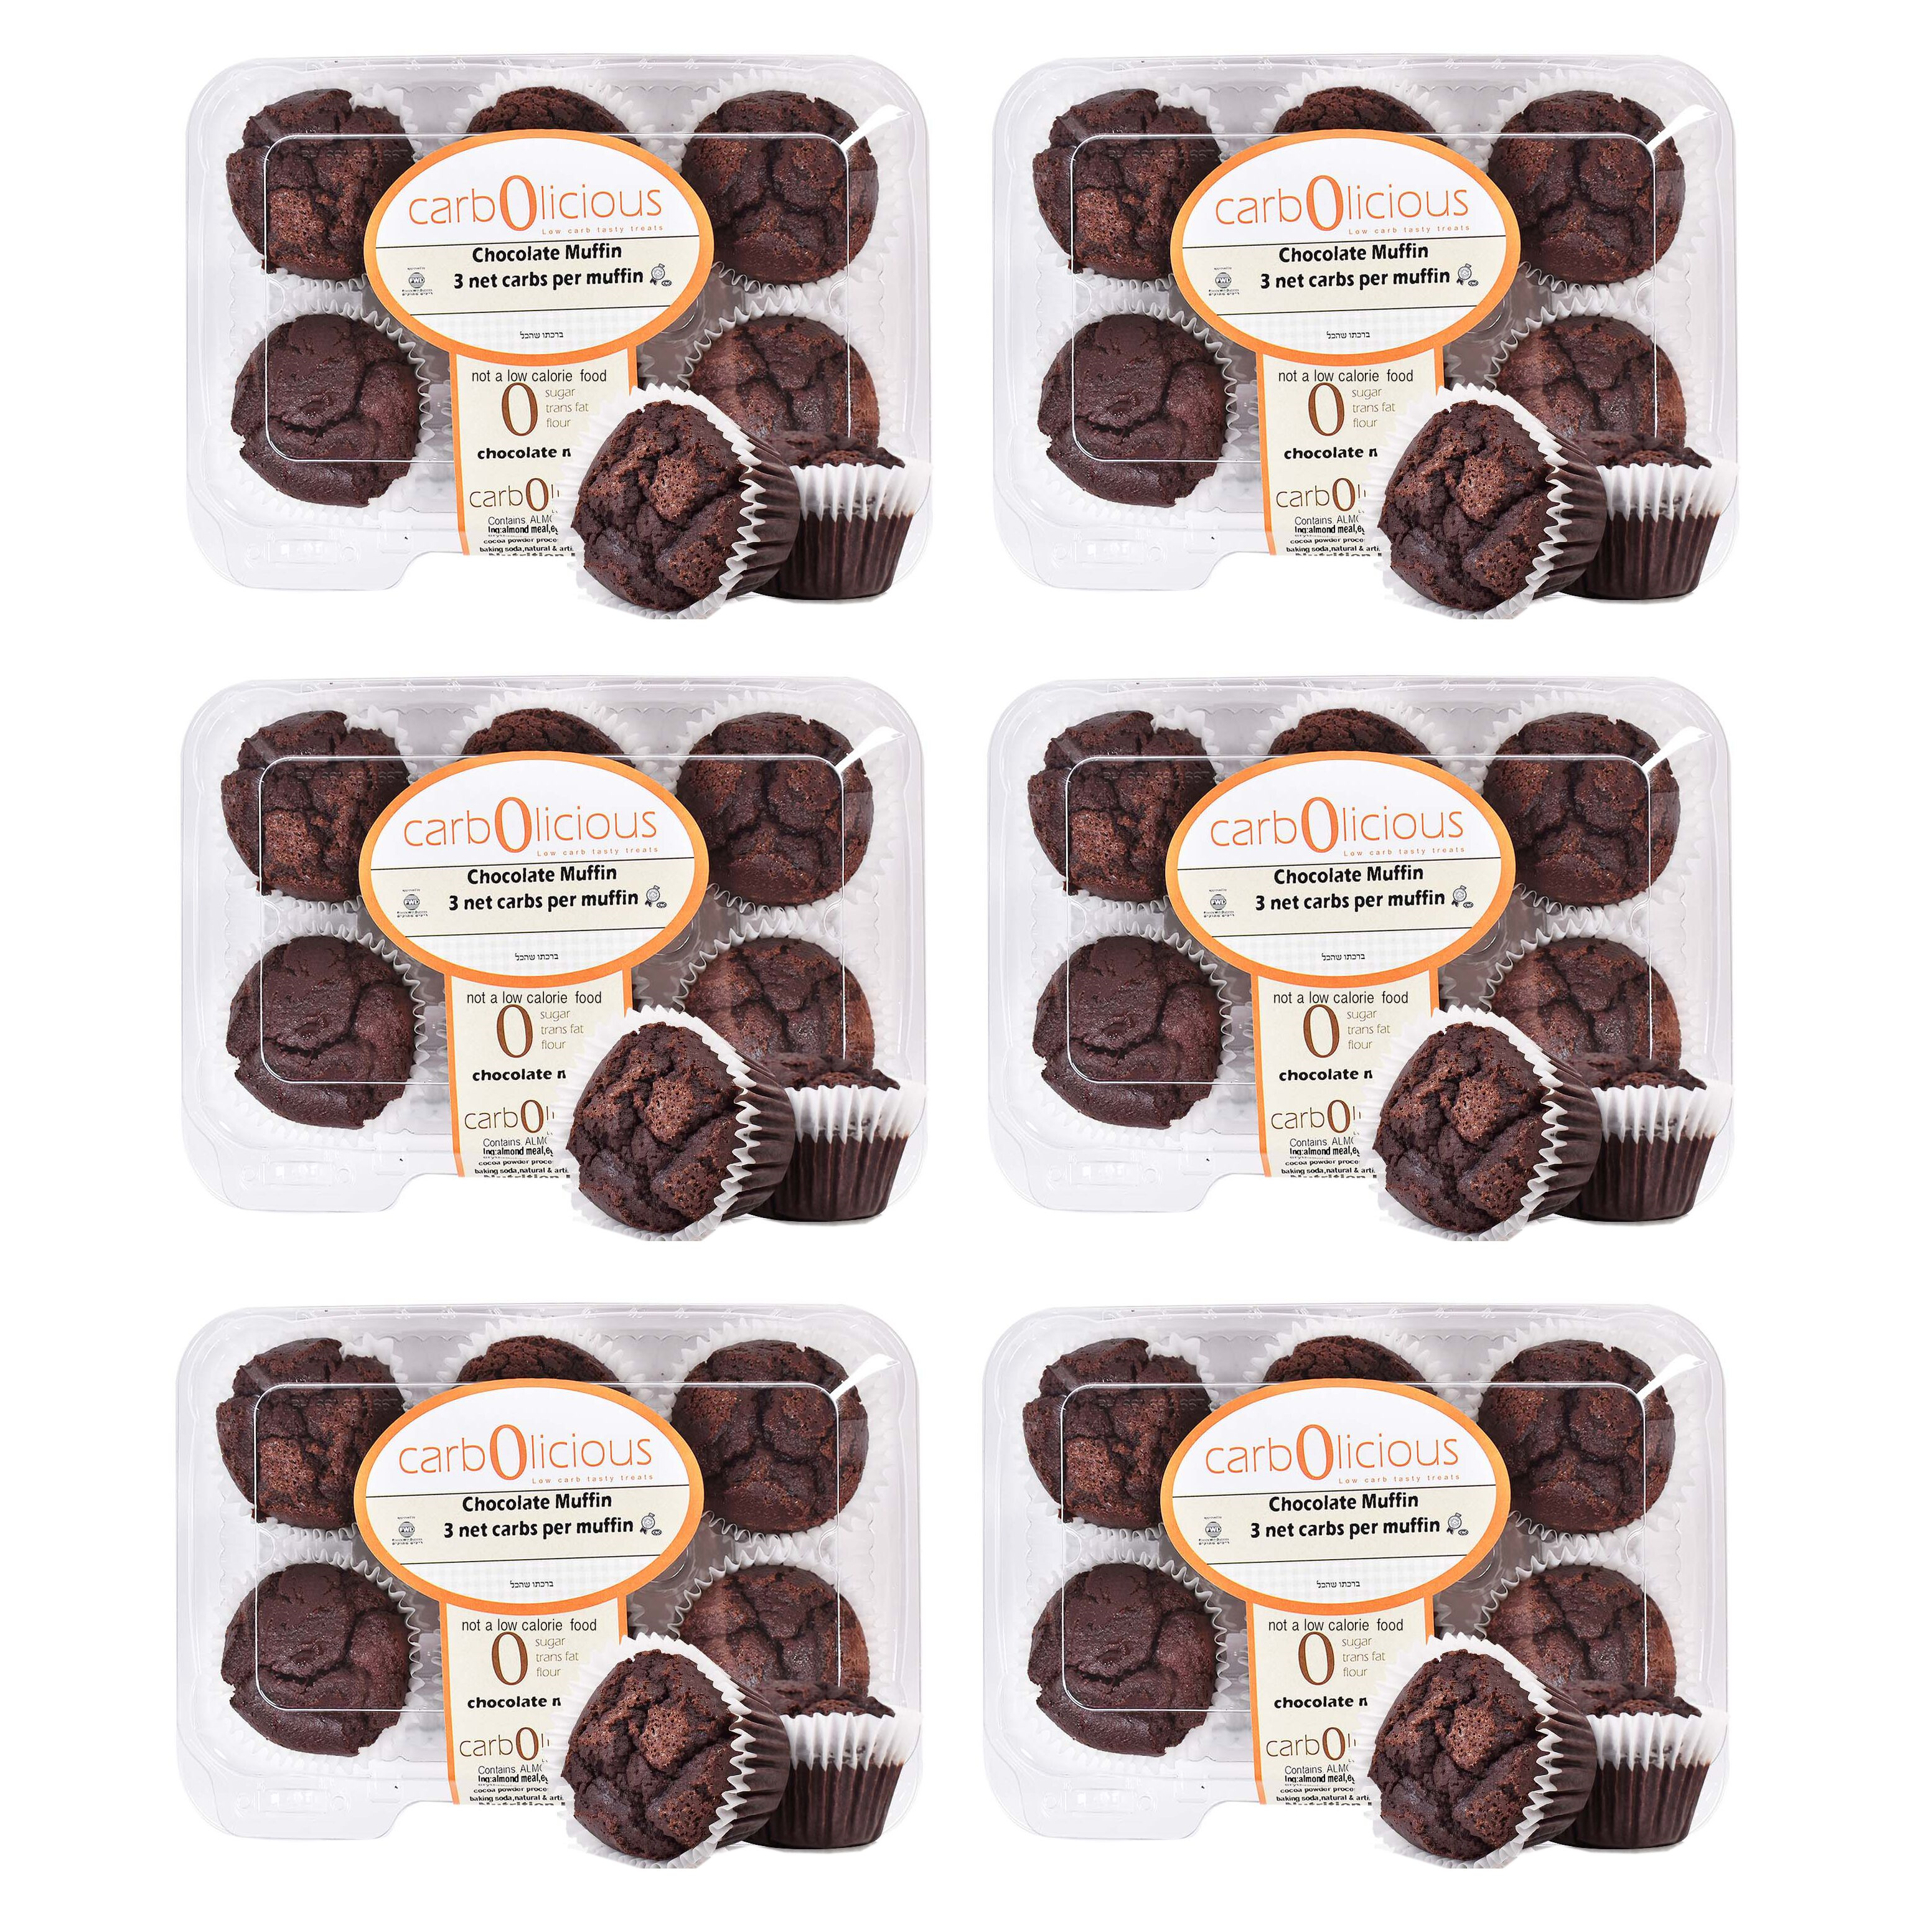 #Flavor_Chocolate #Size_6-Pack (36 Muffins)